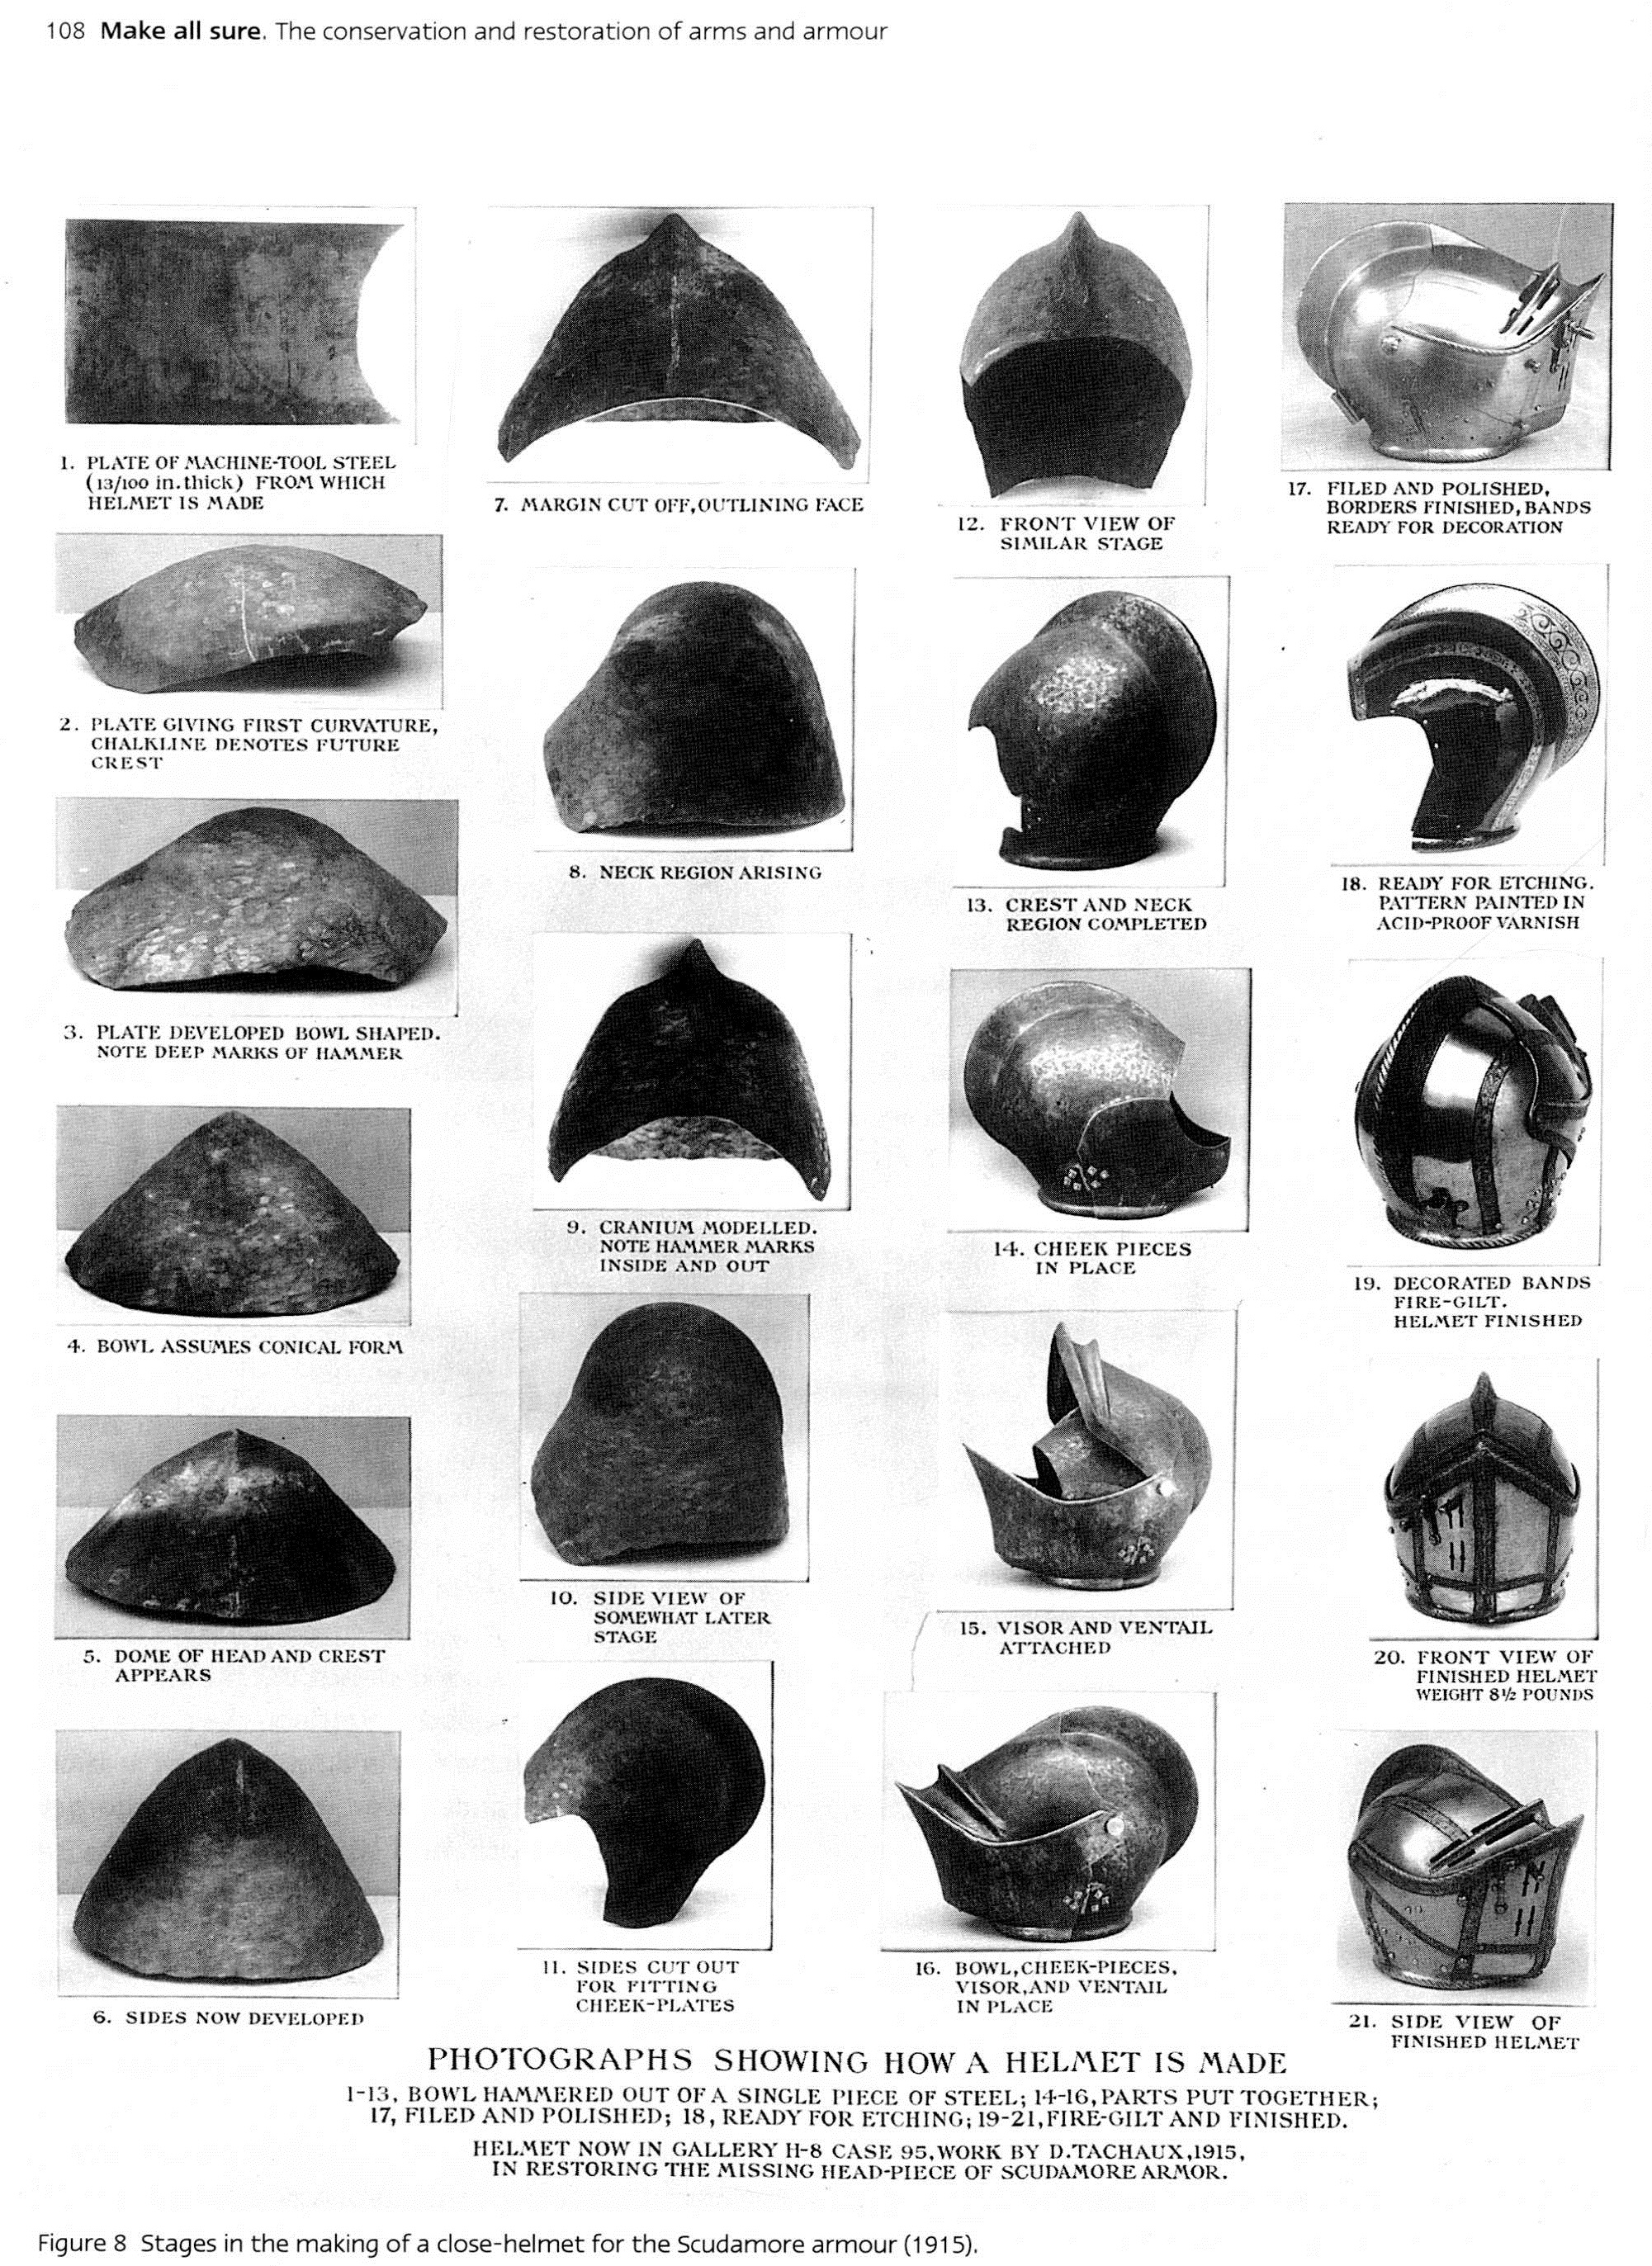 22 black and white photos of a helmet being worked from a simple plate of steel into a visored and polished and engraved and gilt form